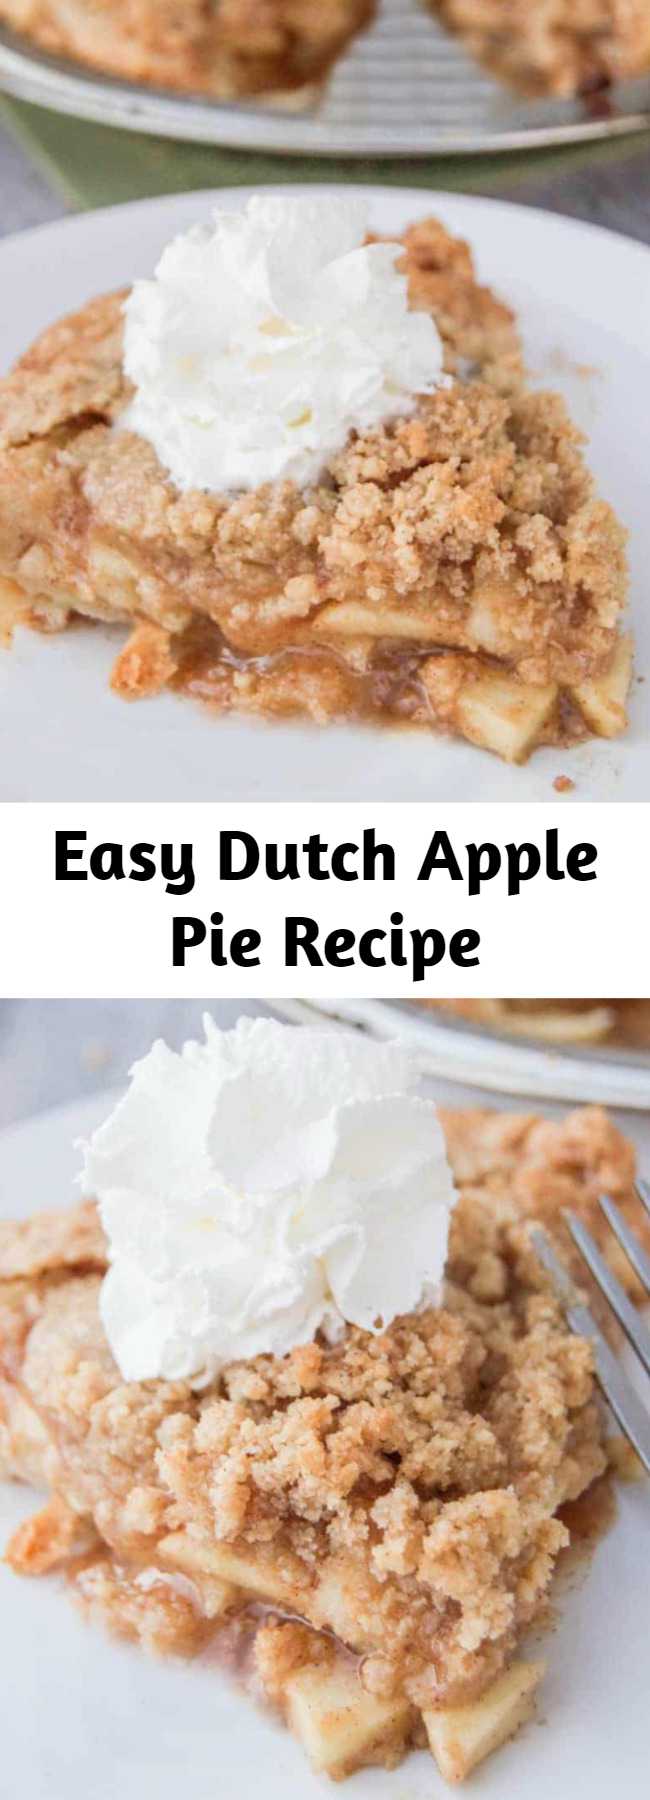 Easy Dutch Apple Pie Recipe - Dutch Apple Pie is one of my all time favorites. Something about warm apples, brown sugar, and whipped cream that make the perfect combination. This pie has rave reviews and is loved by everyone. You need to make sure that you pin this one for the holidays!!